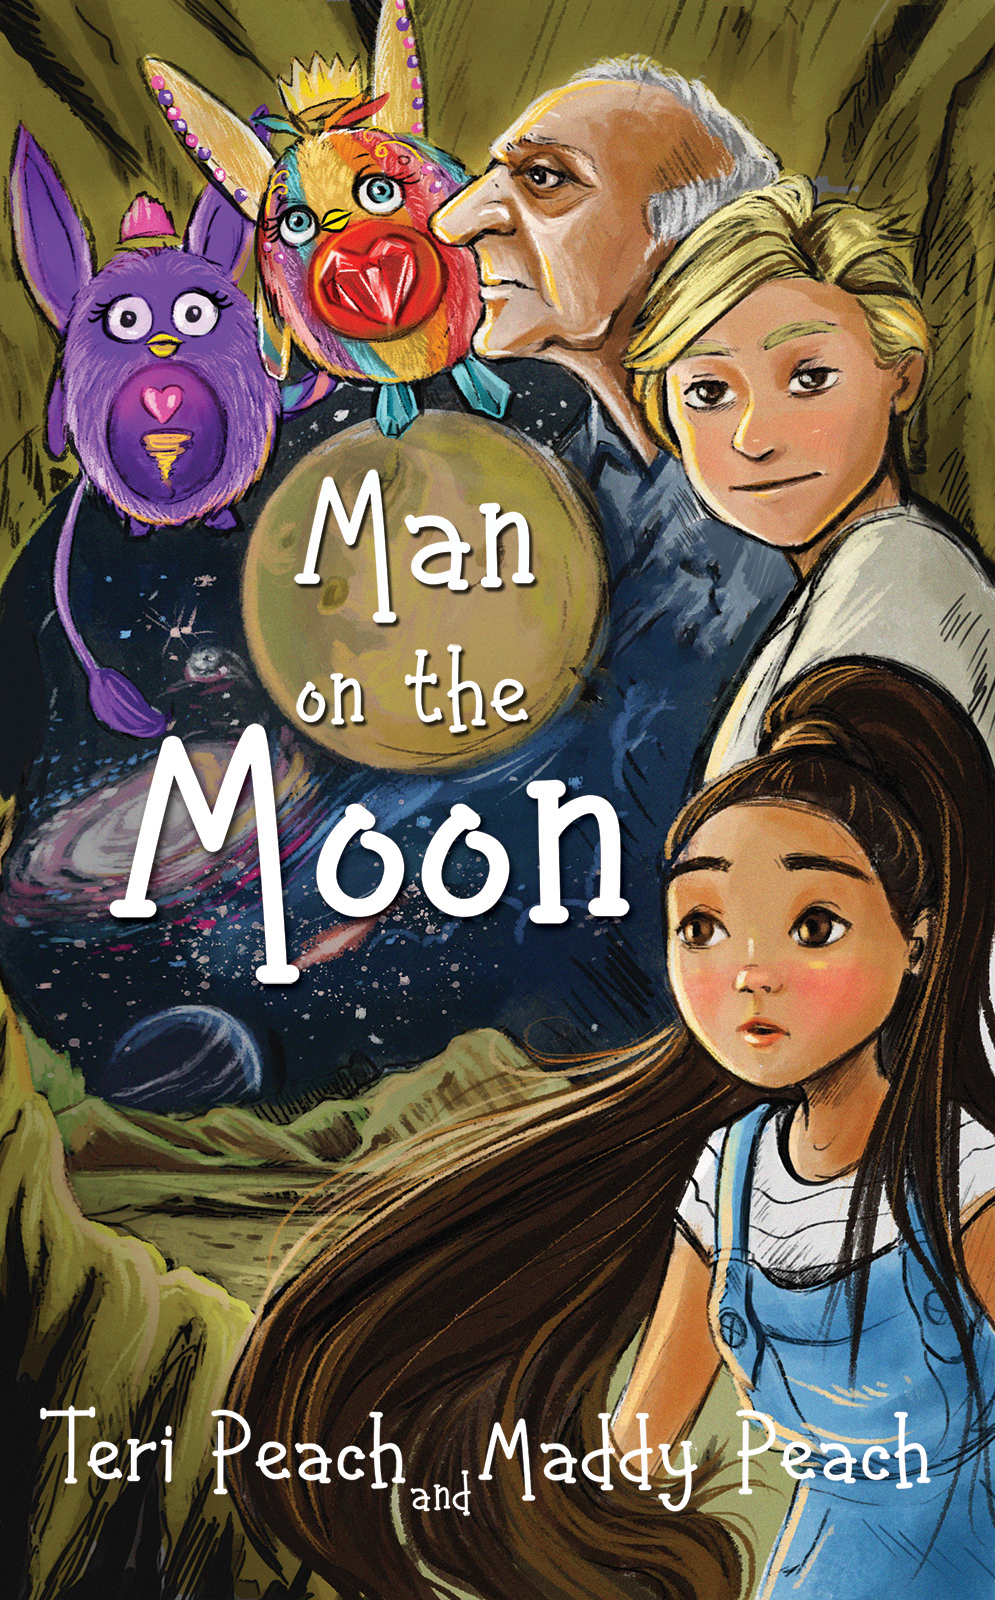 This image is the cover for the book Man on the Moon